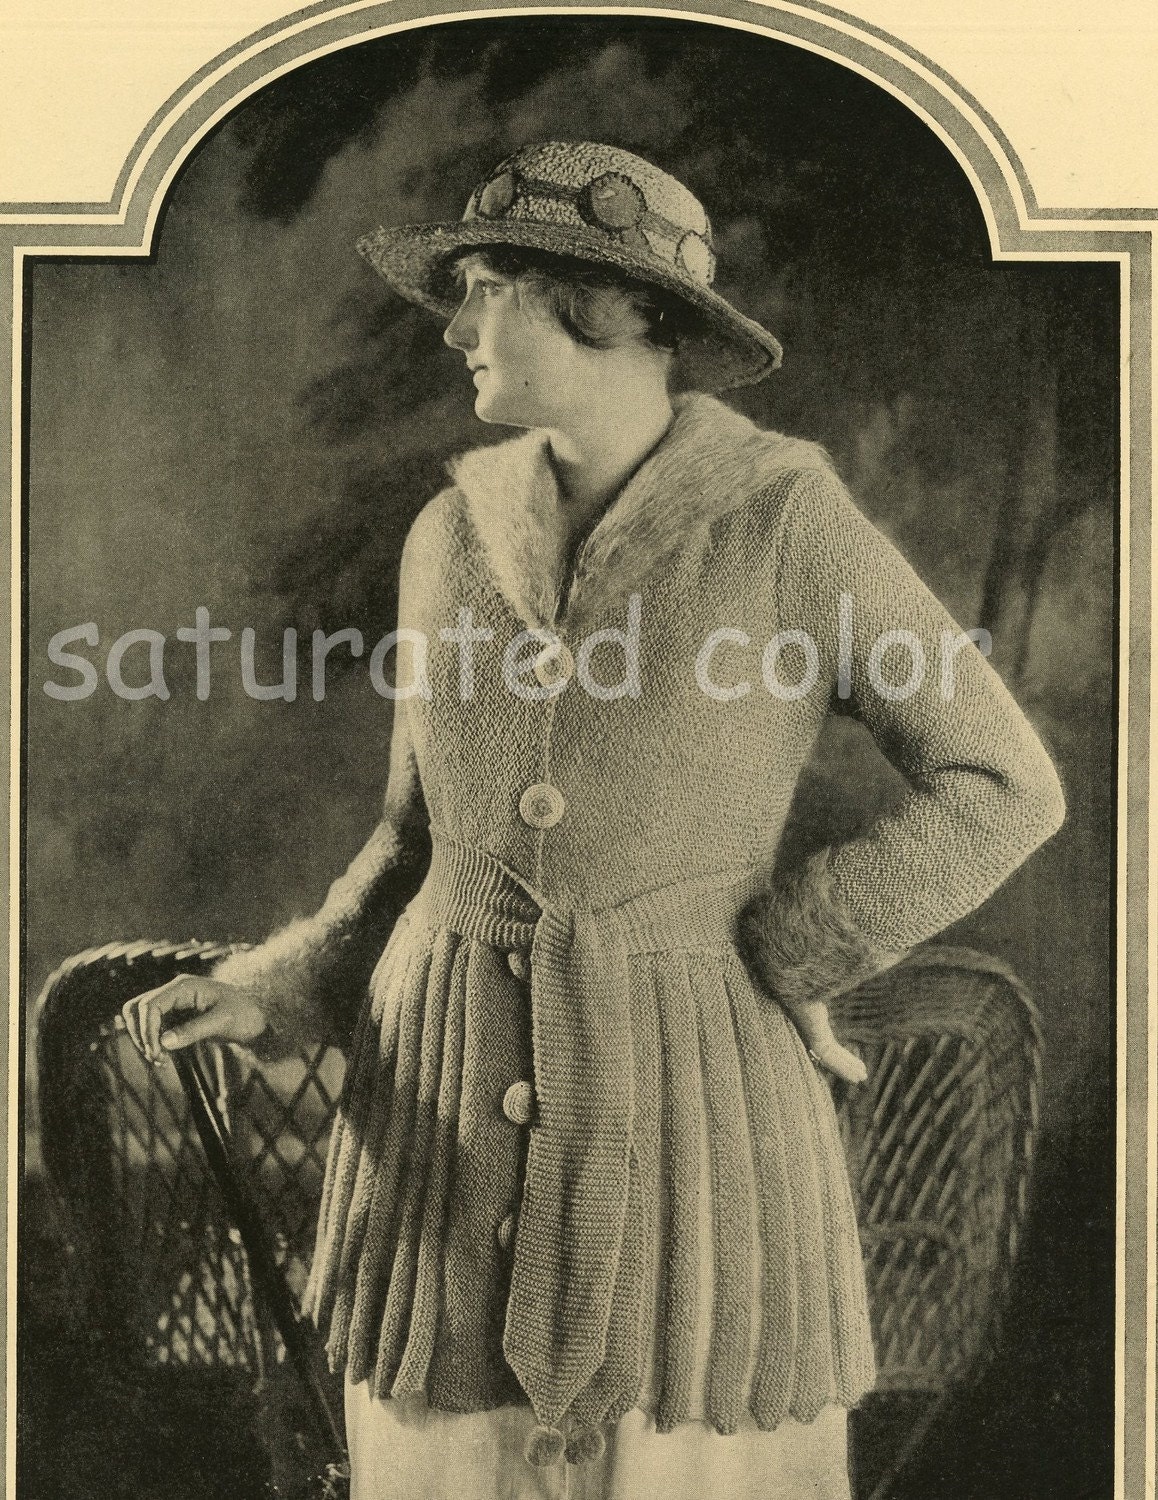 1918  Beautiful Woman in Sweater Sepia Print to frame -  Keetch Knitting Mills - Cleveland Ohio - Boston